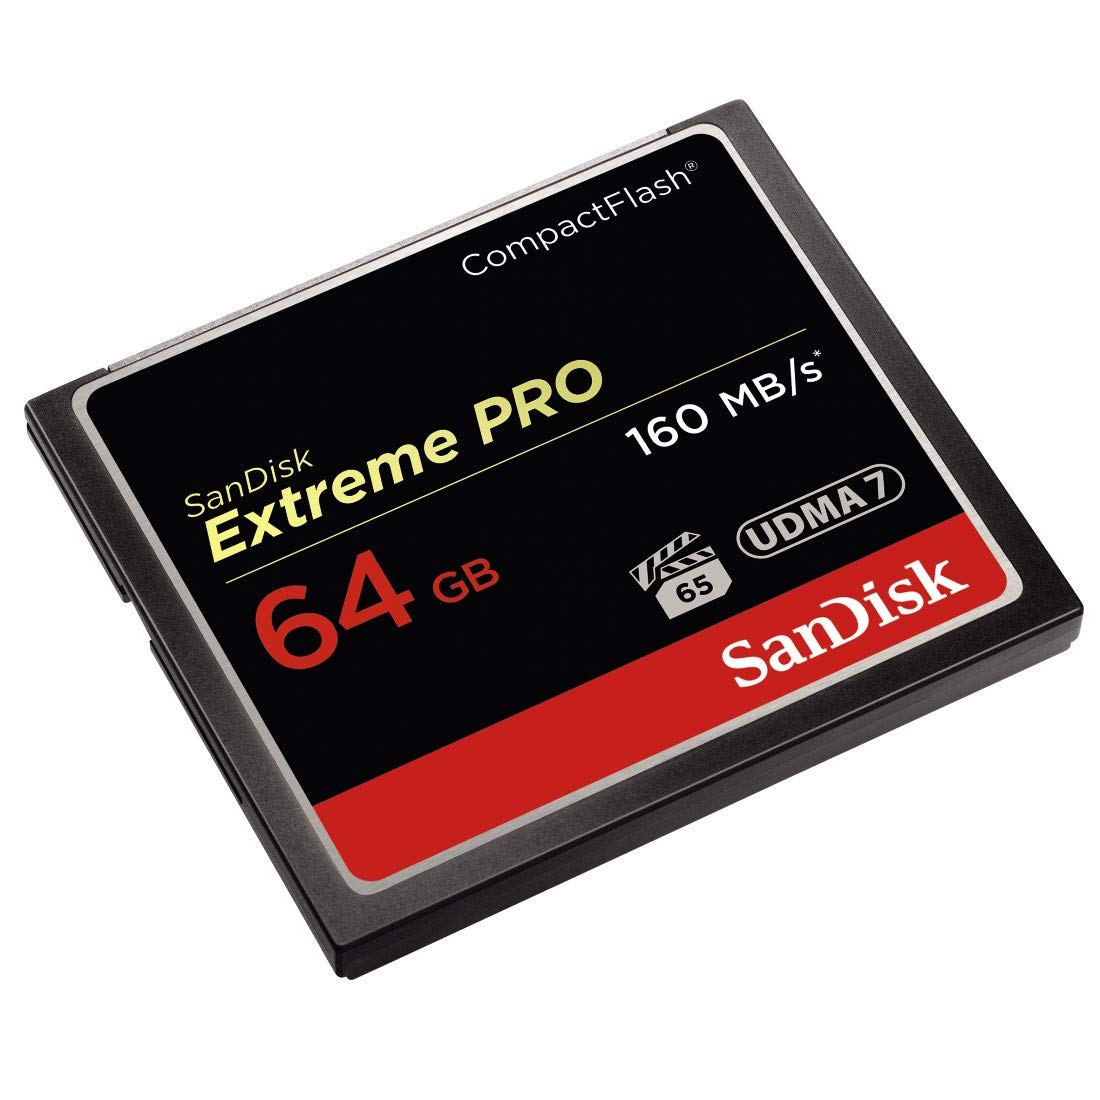 SanDisk Extreme PRO 64GB Compact Flash Memory Card UDMA 7 Speed Up To 160MB/s - SDCFXPS-064G-X46 (Open Box, Like New)